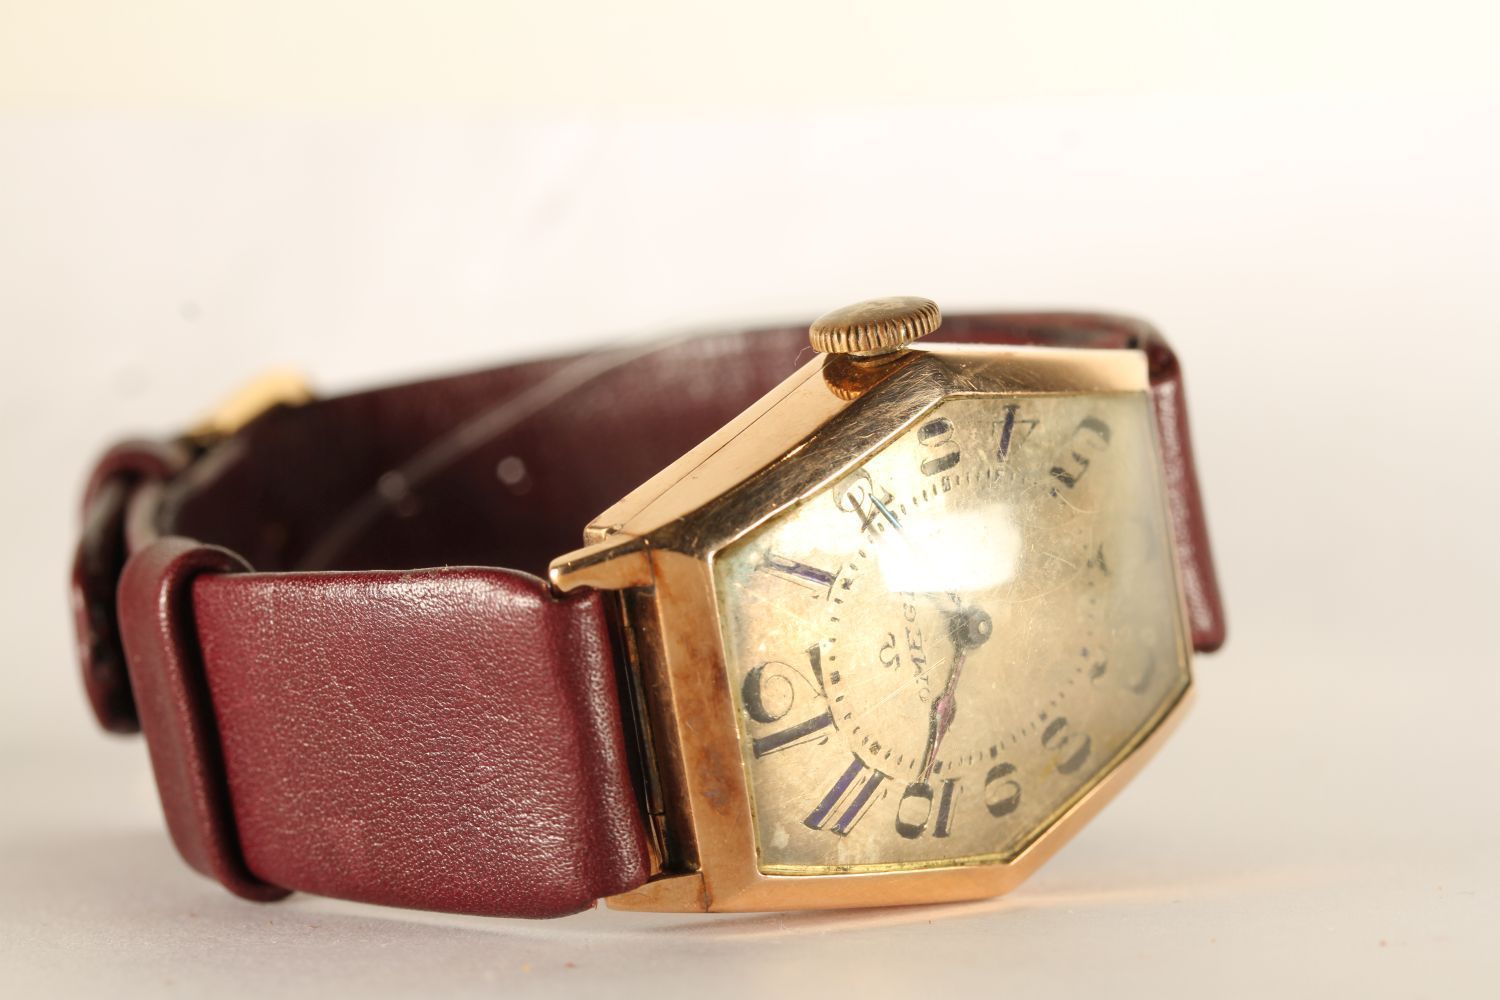 GENTLEMENS OMEGA OVERSIZE WRISTWATCH CIRCA 1920/30s, hexagonal aged dial with arabic numbers and - Image 2 of 4